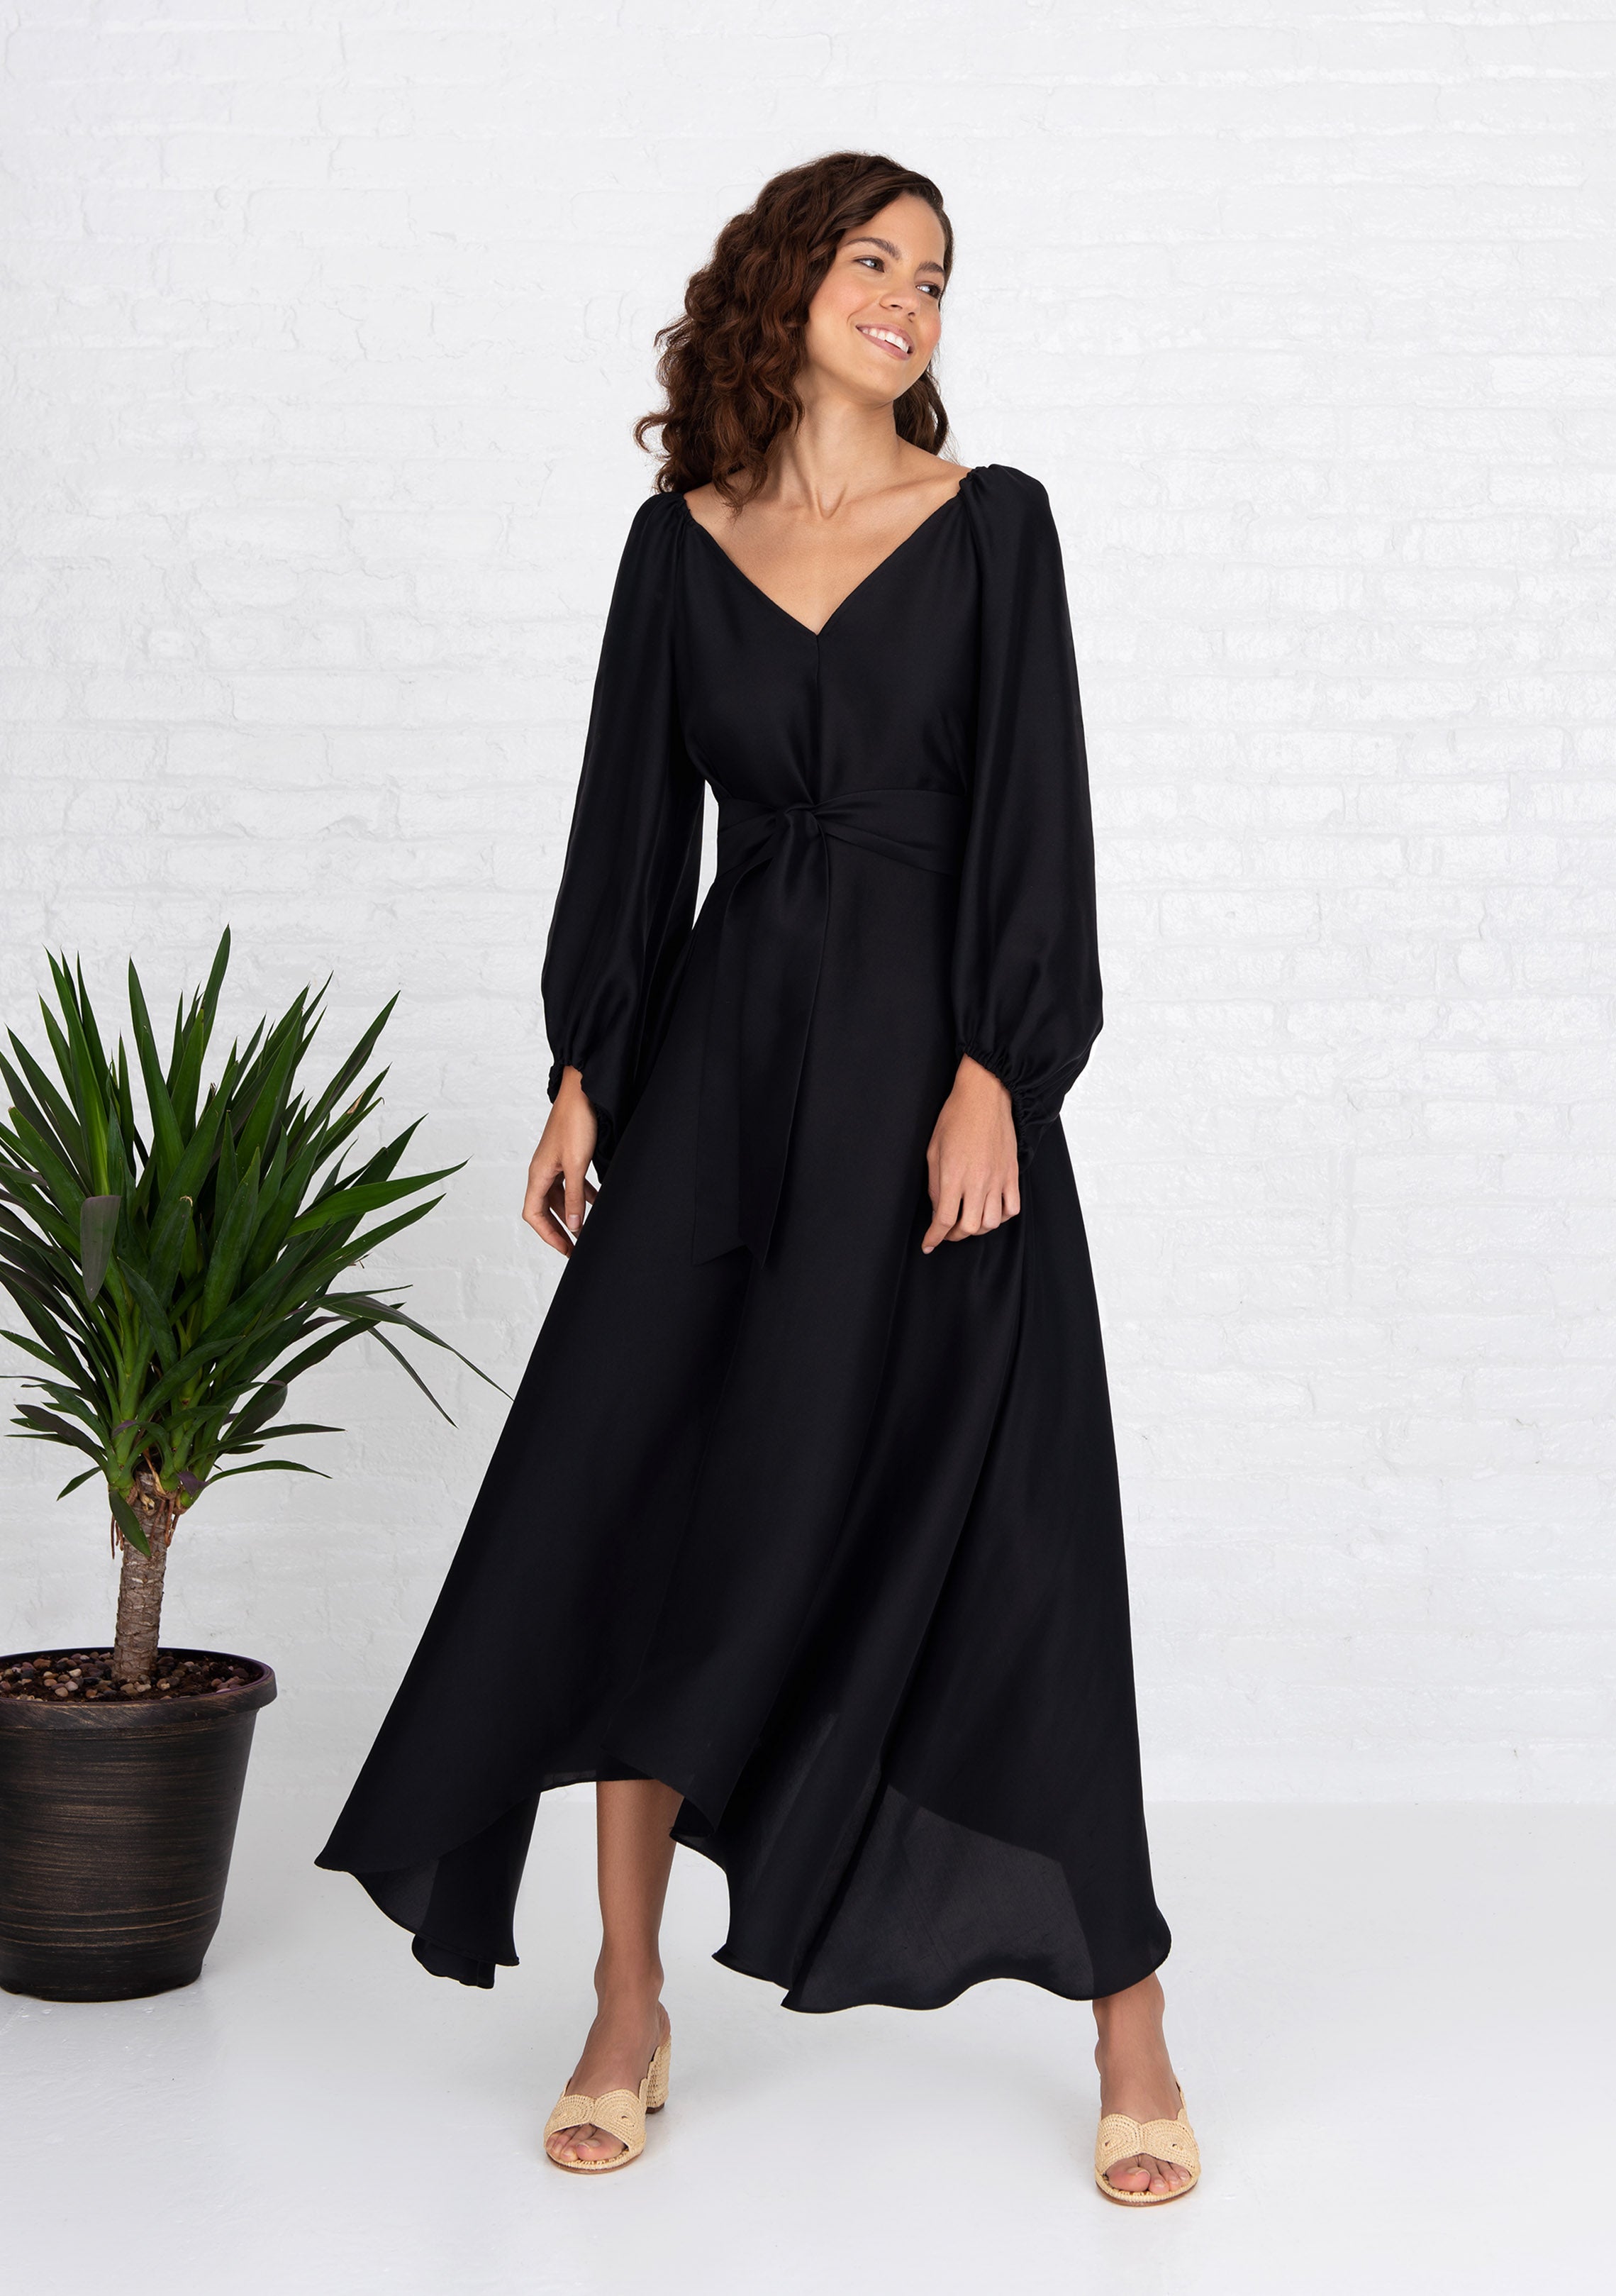 front view of woman wearing black puff sleeve silk dress front and back v neck with heels